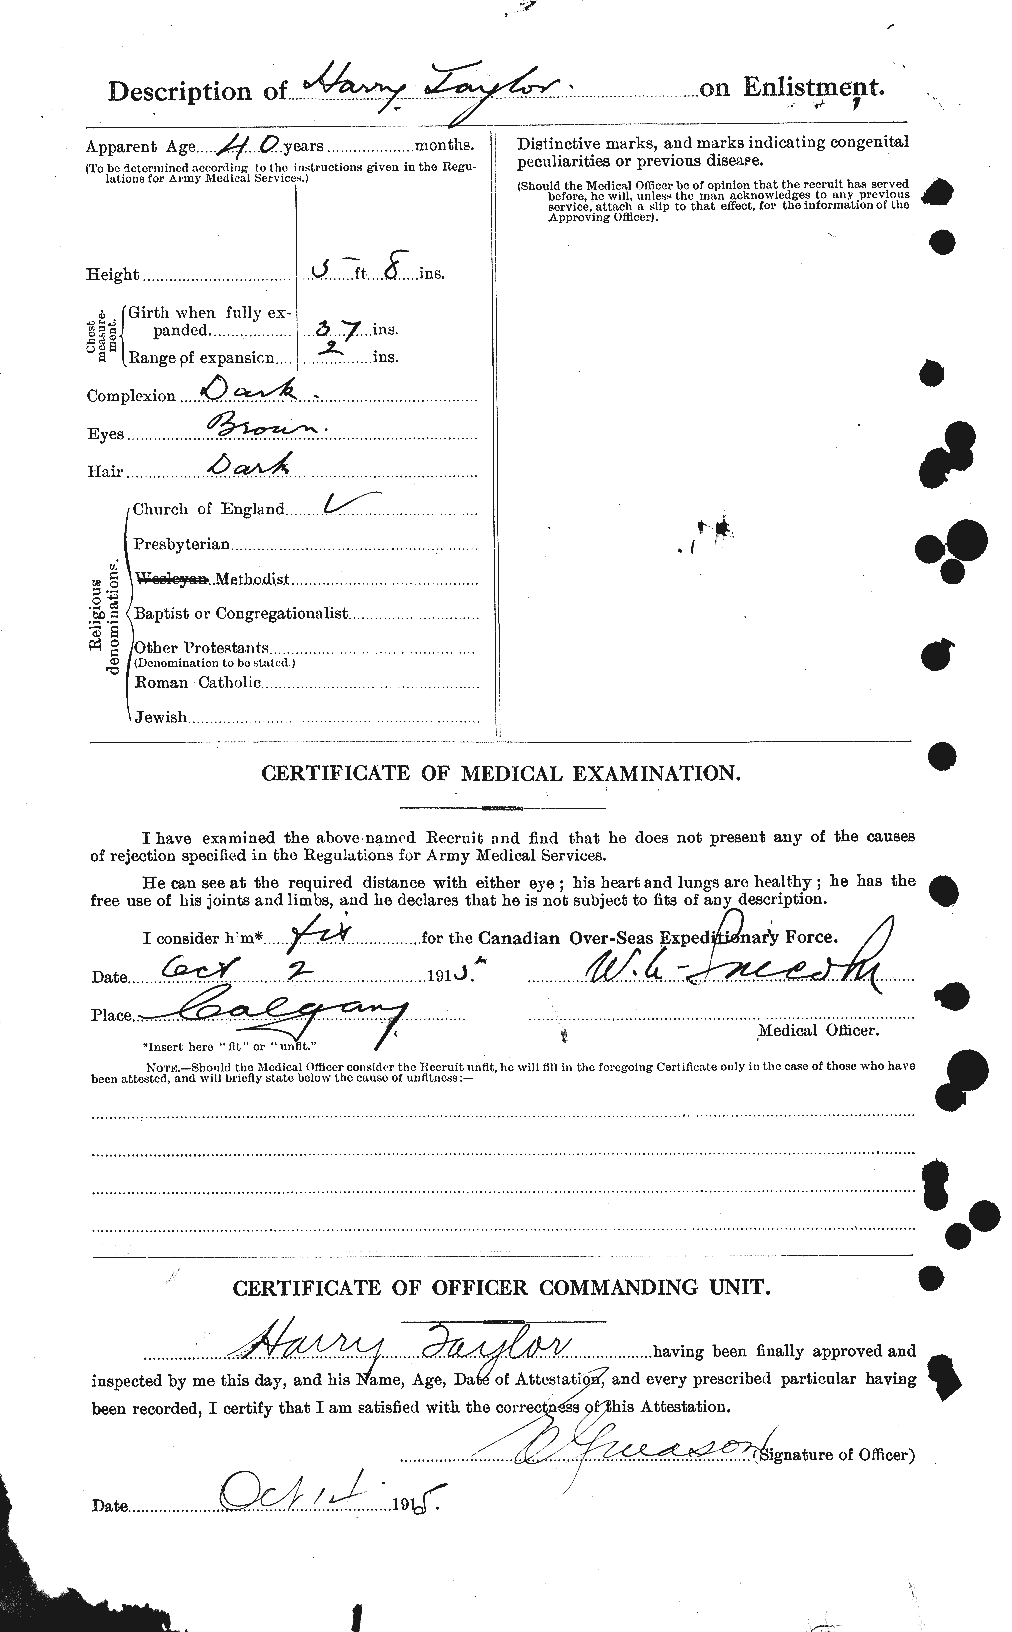 Personnel Records of the First World War - CEF 626476b